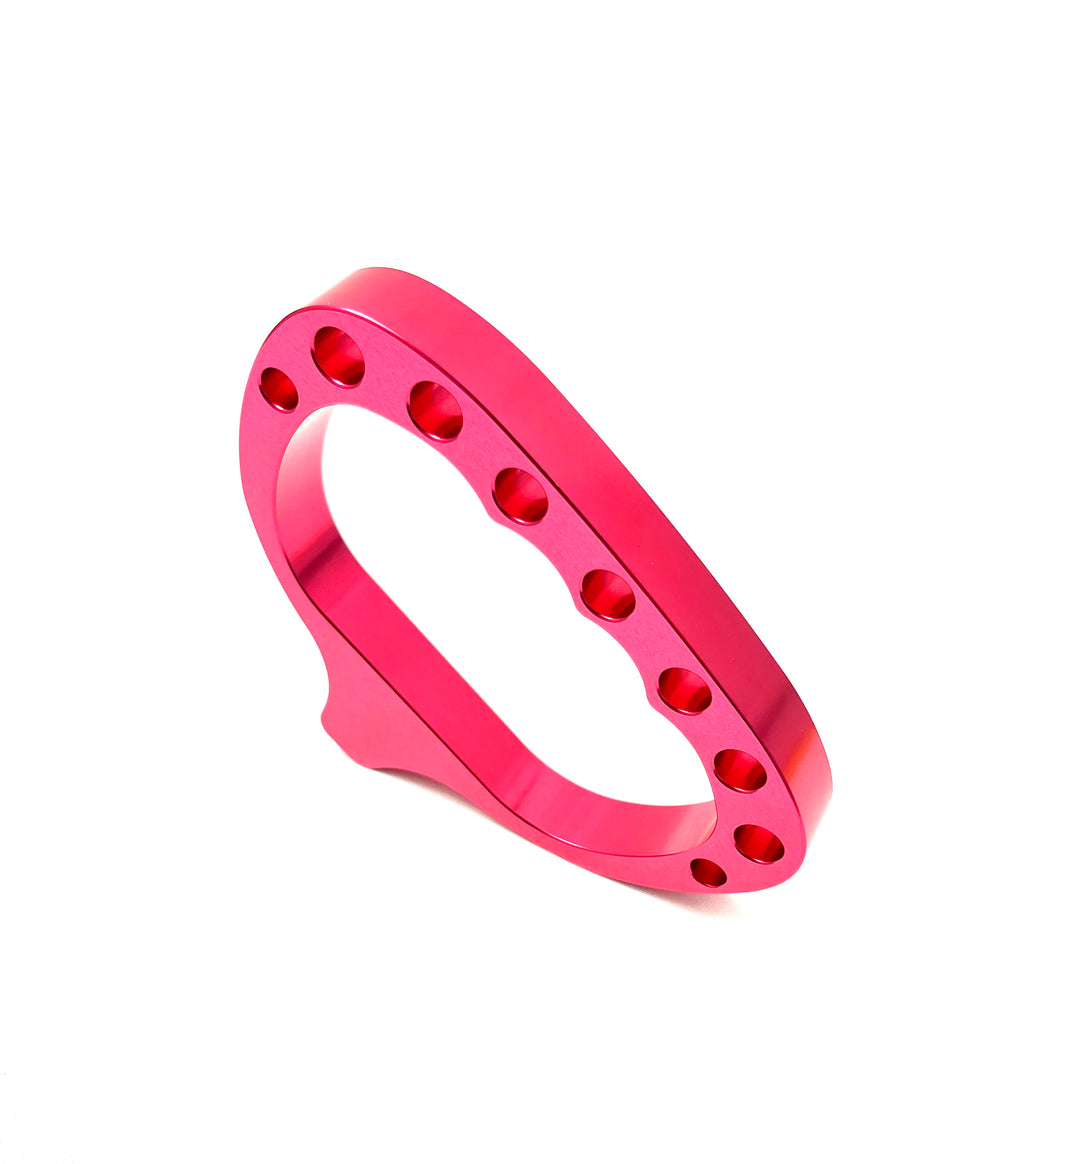 PINK anodized Pull Cord Handle